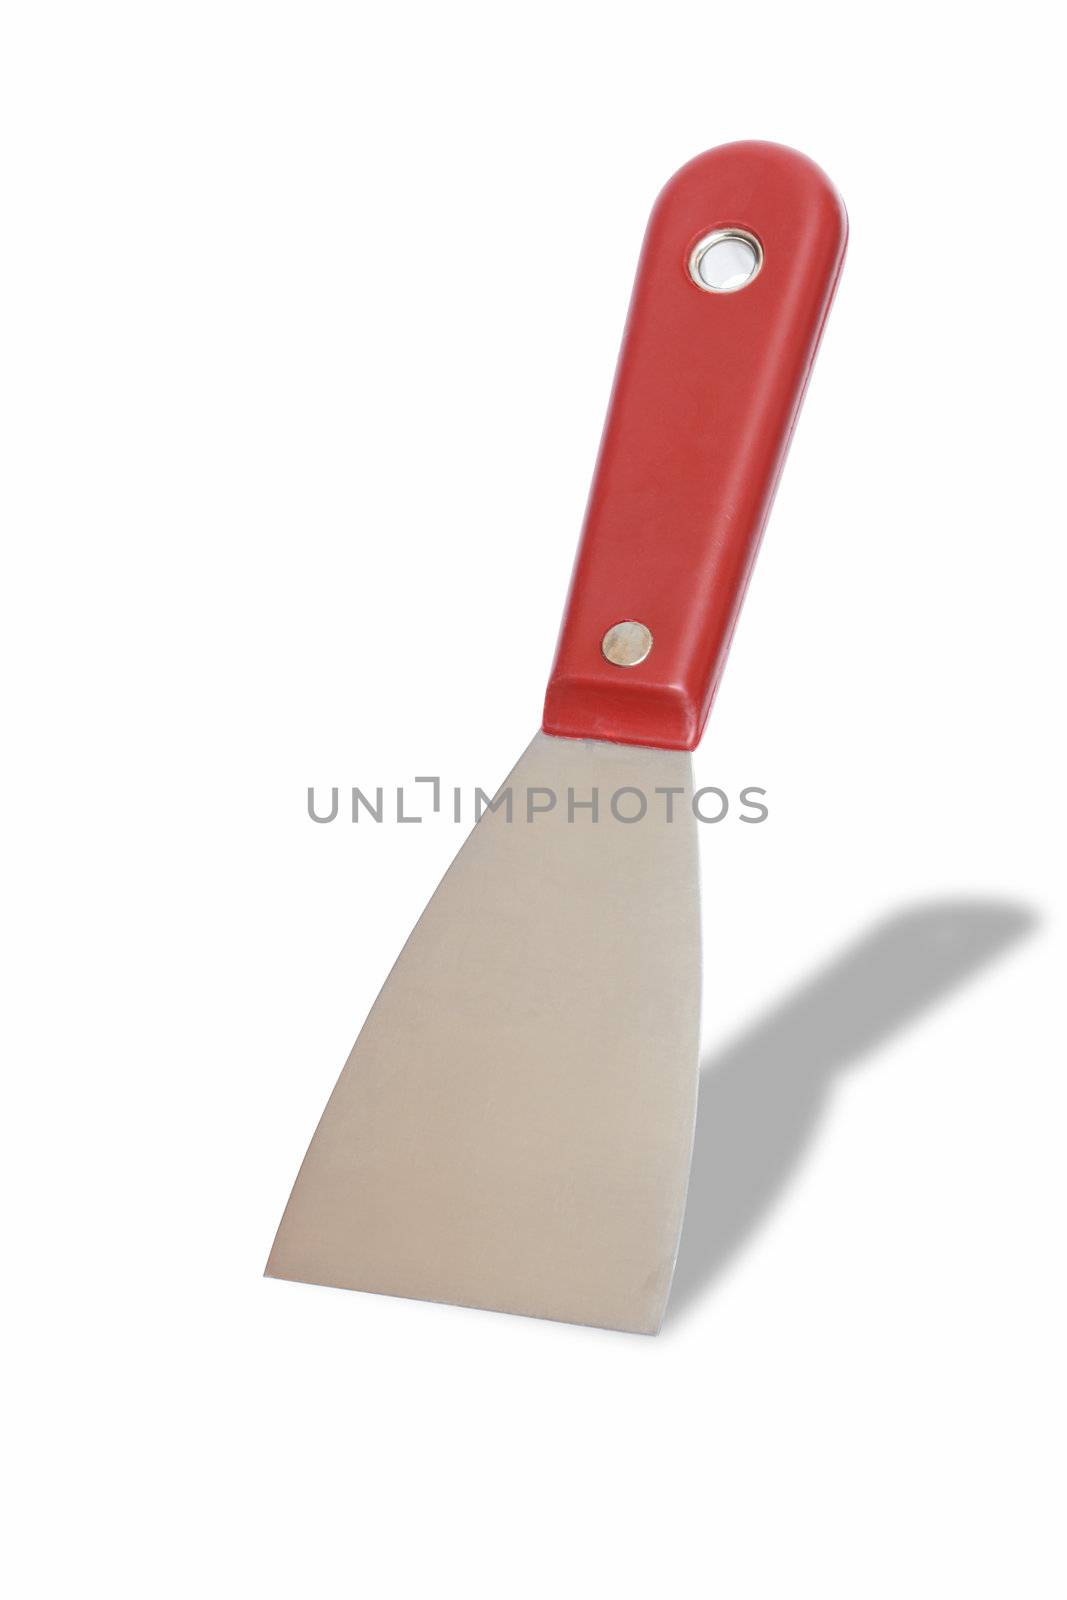 Putty knife isolated on white background with clipping path